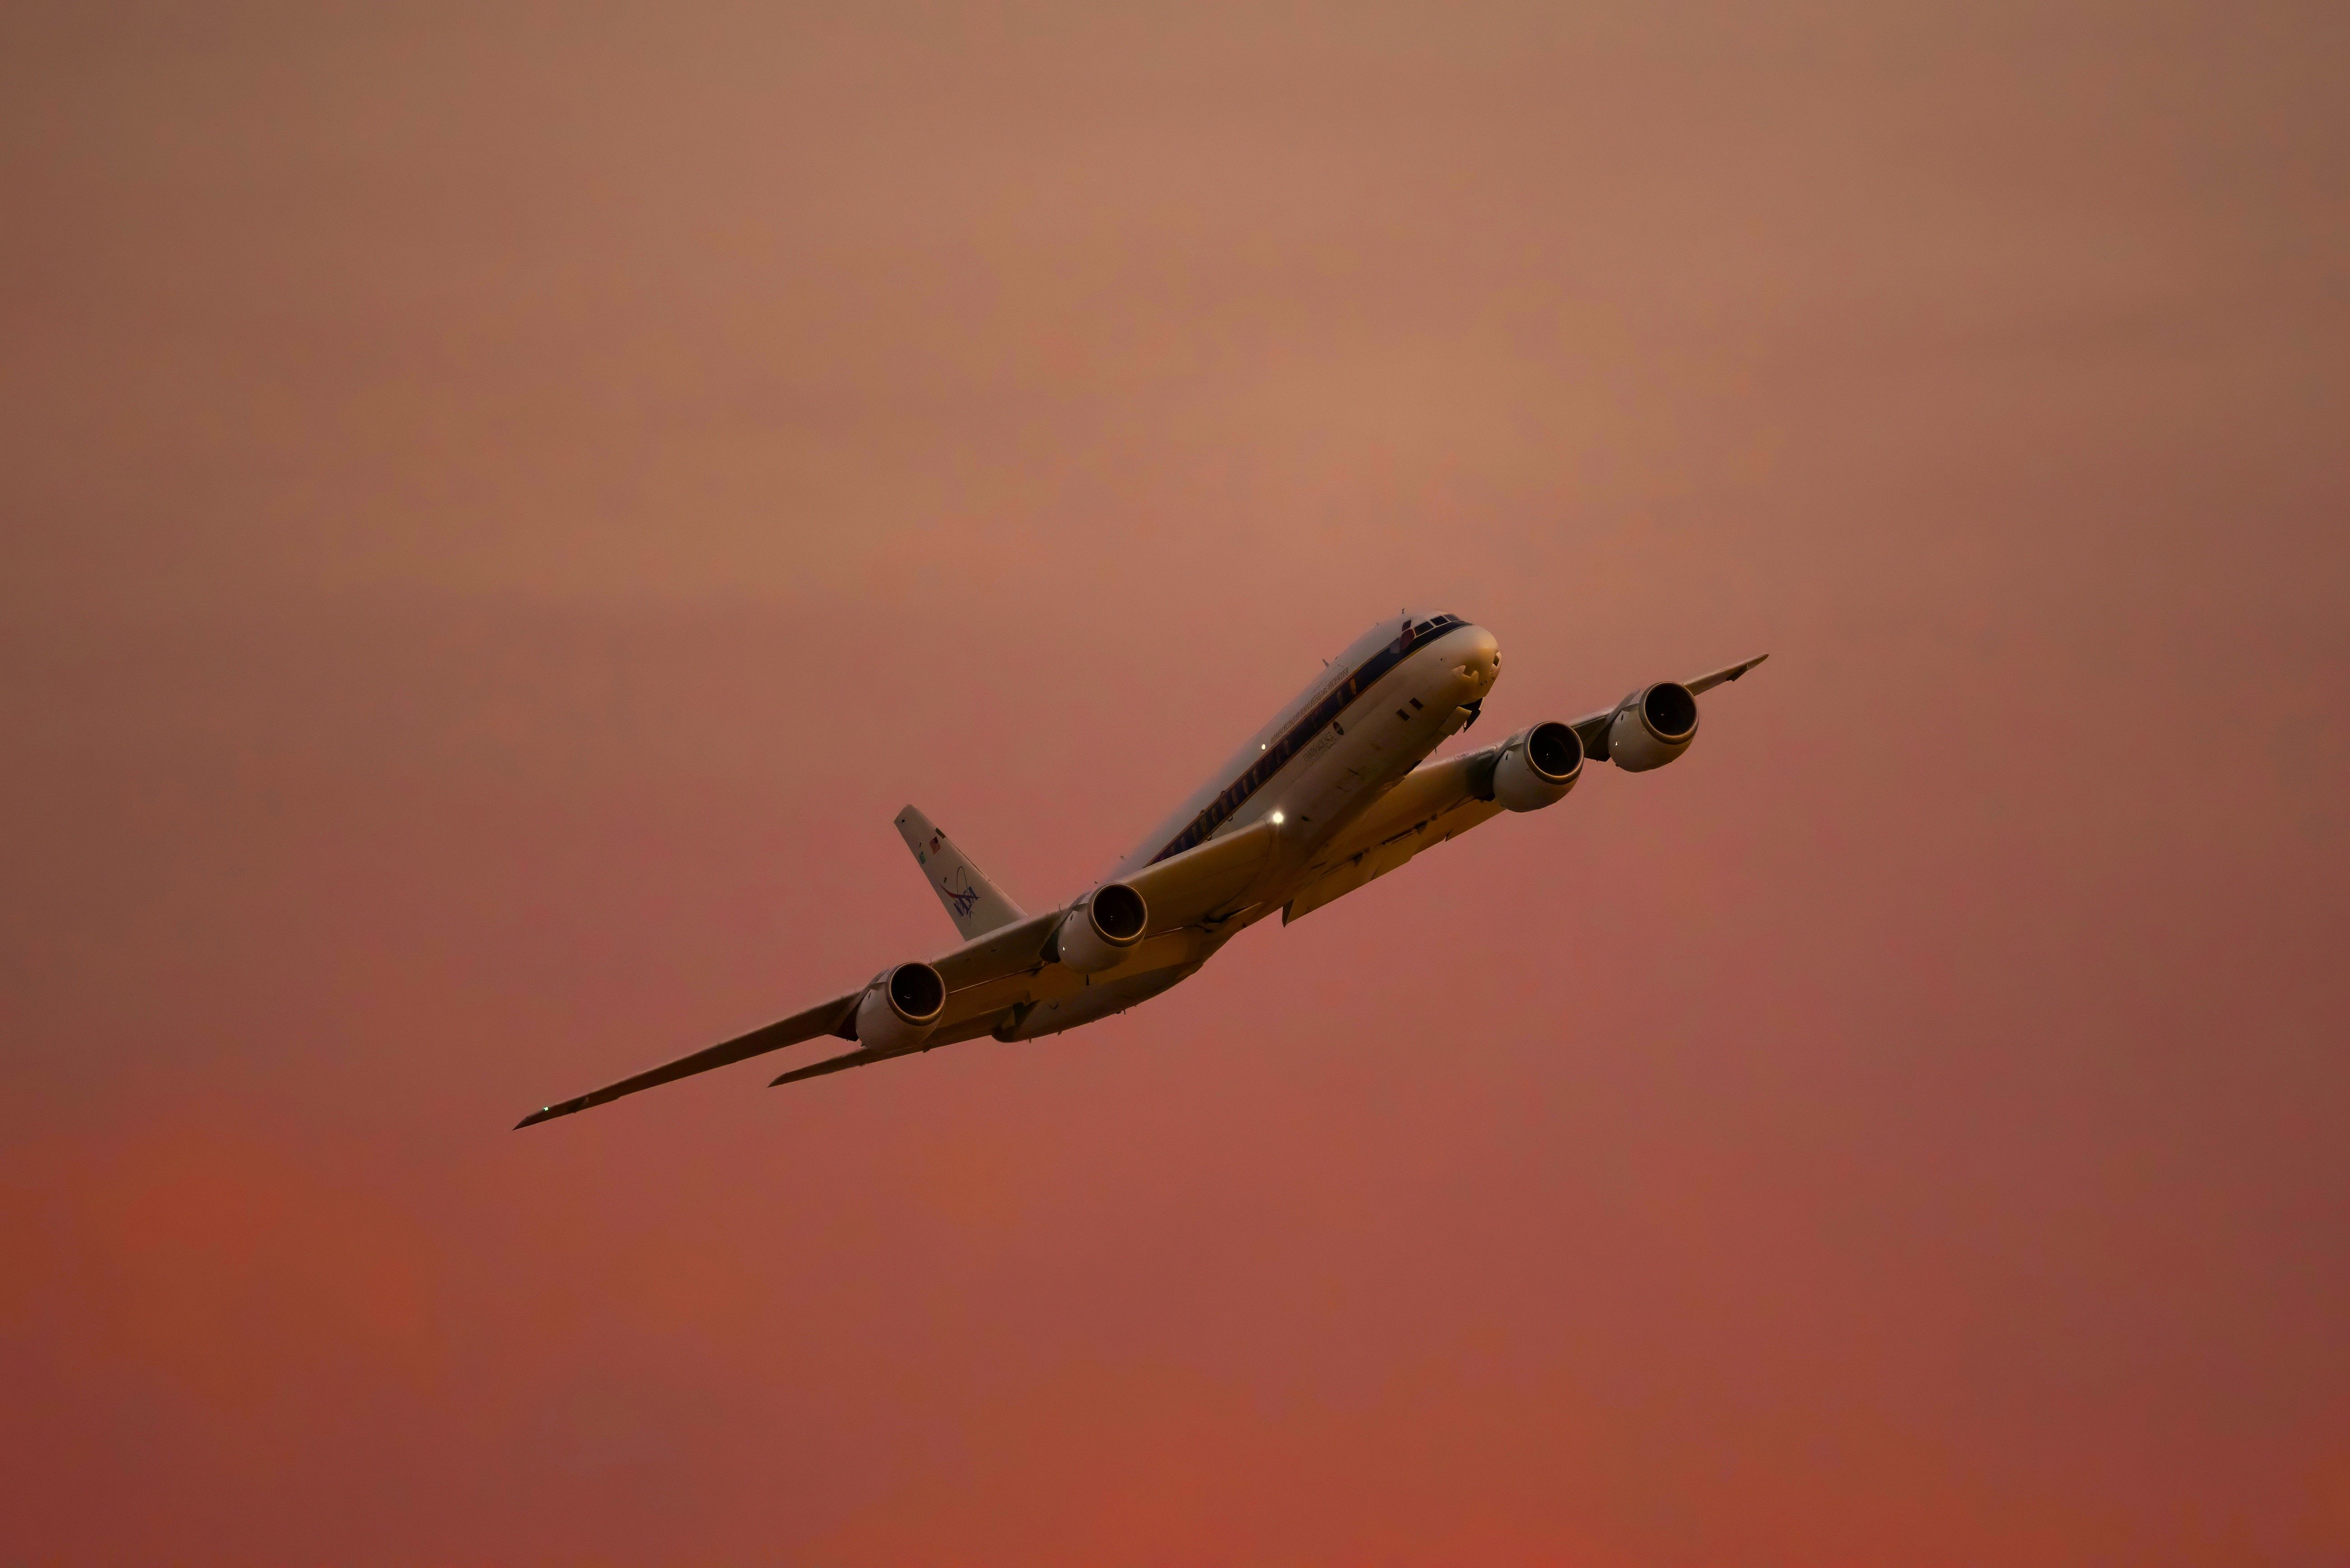 Topaz-AFRC2021-0003-14 v2 - NASA DC-8 lifts off from Air Force Plant 42 in Palmdale, Calif., at sunset.